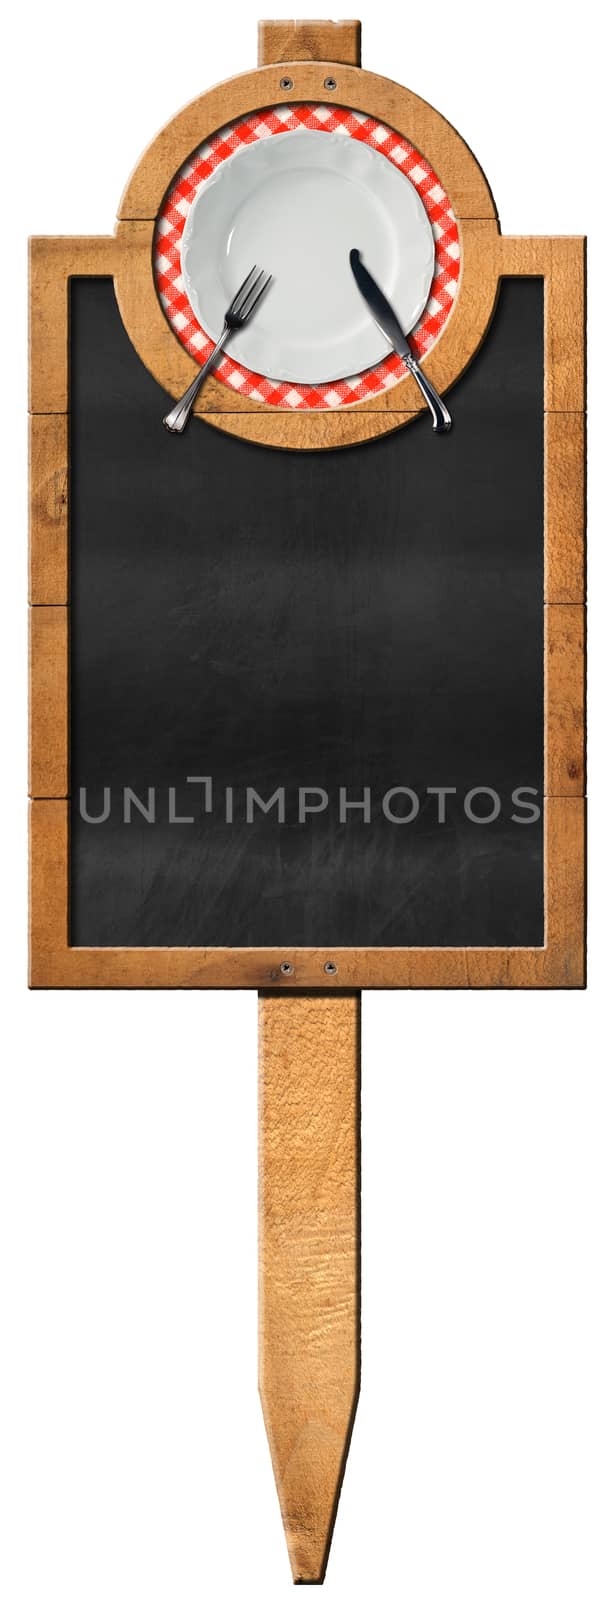 Empty blackboard with wooden frame and white plate with cutlery. Hanging on a wooden pole and isolated on white. Template for a food menu